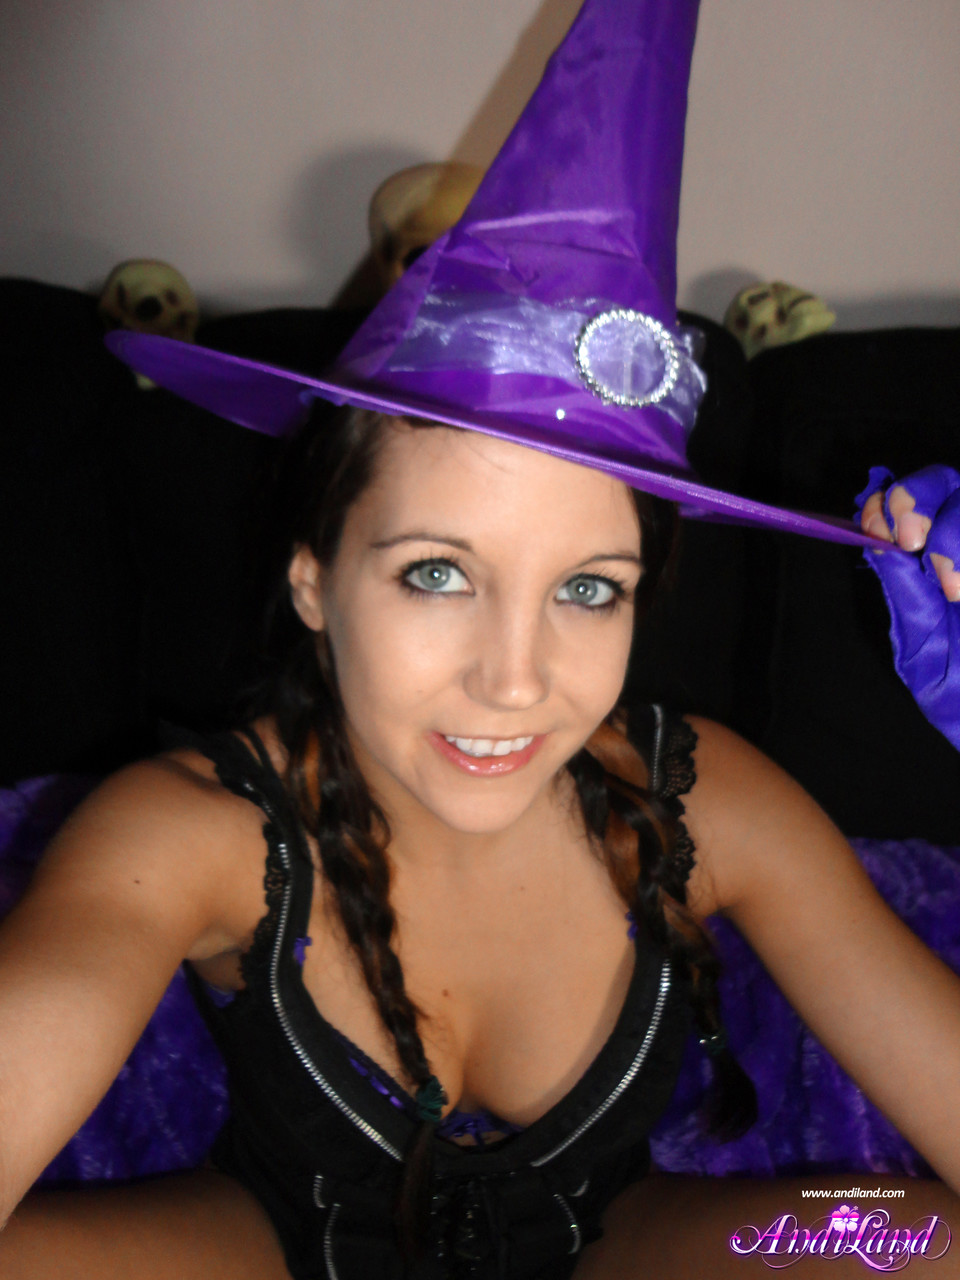 Teen amateur Andi Land teases during upskirt action in a Halloween outfit foto pornográfica #428432666 | Andi Land Pics, Andi Land, Cosplay, pornografia móvel